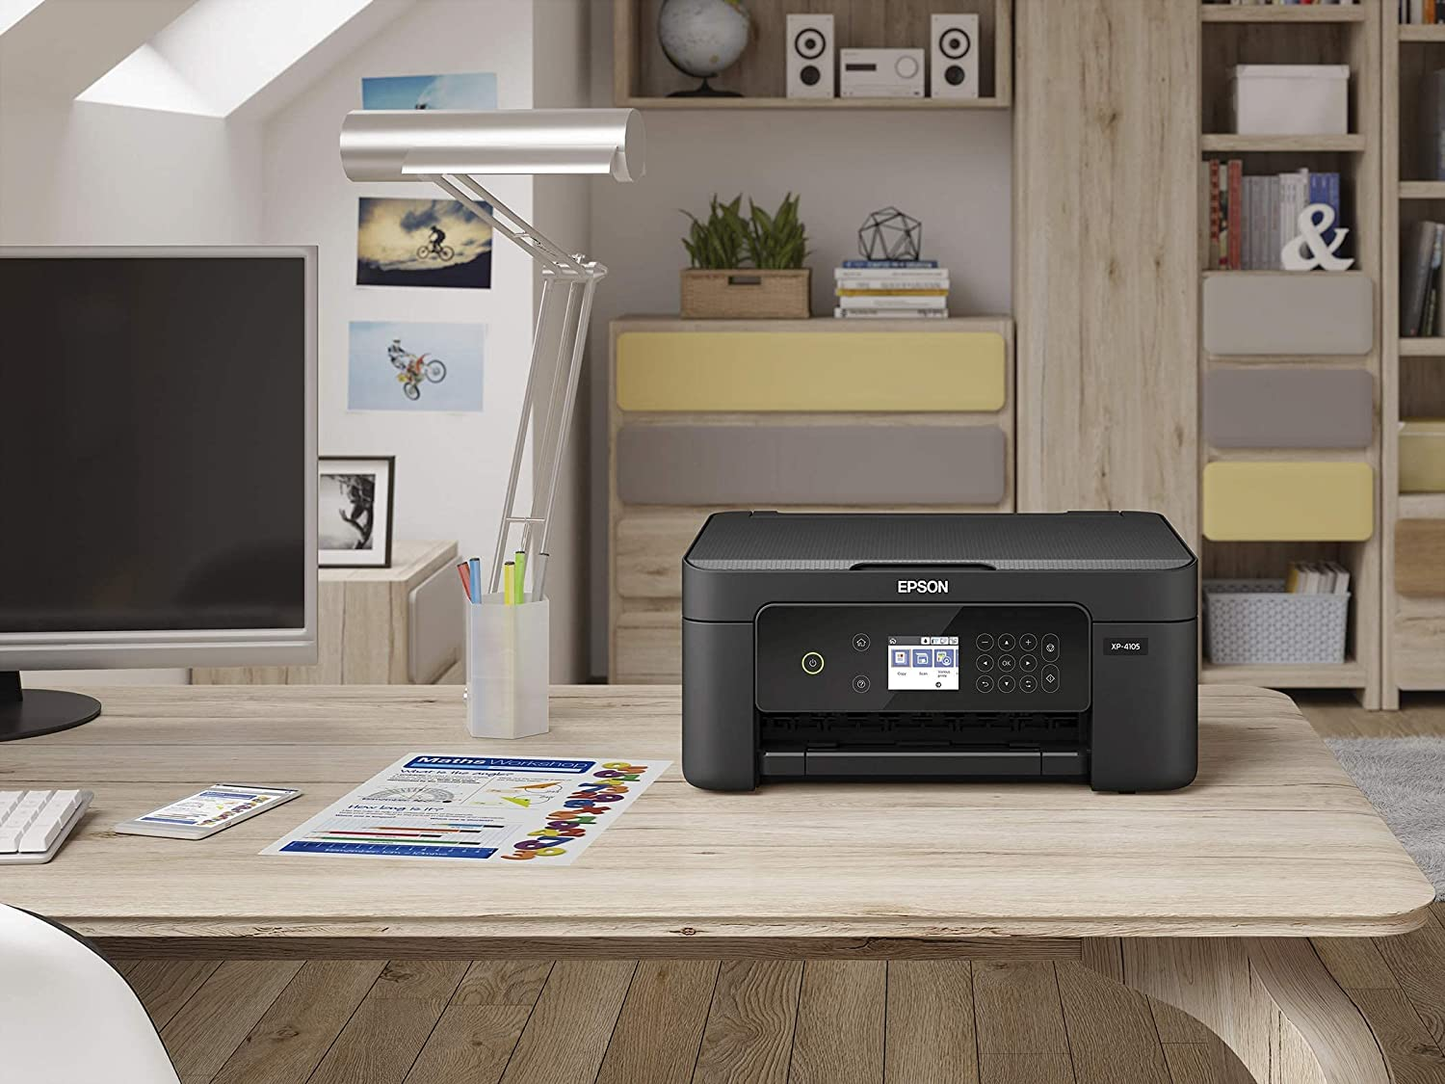 Epson Premium Expression Home 4105 Series Small All-In-One Color Inkjet Printer I Print Copy Scan I Wireless I Mobile Printing I Auto 2-Sided Printing I 2.4" LCD I 10 ISO Ppm (Renewed)